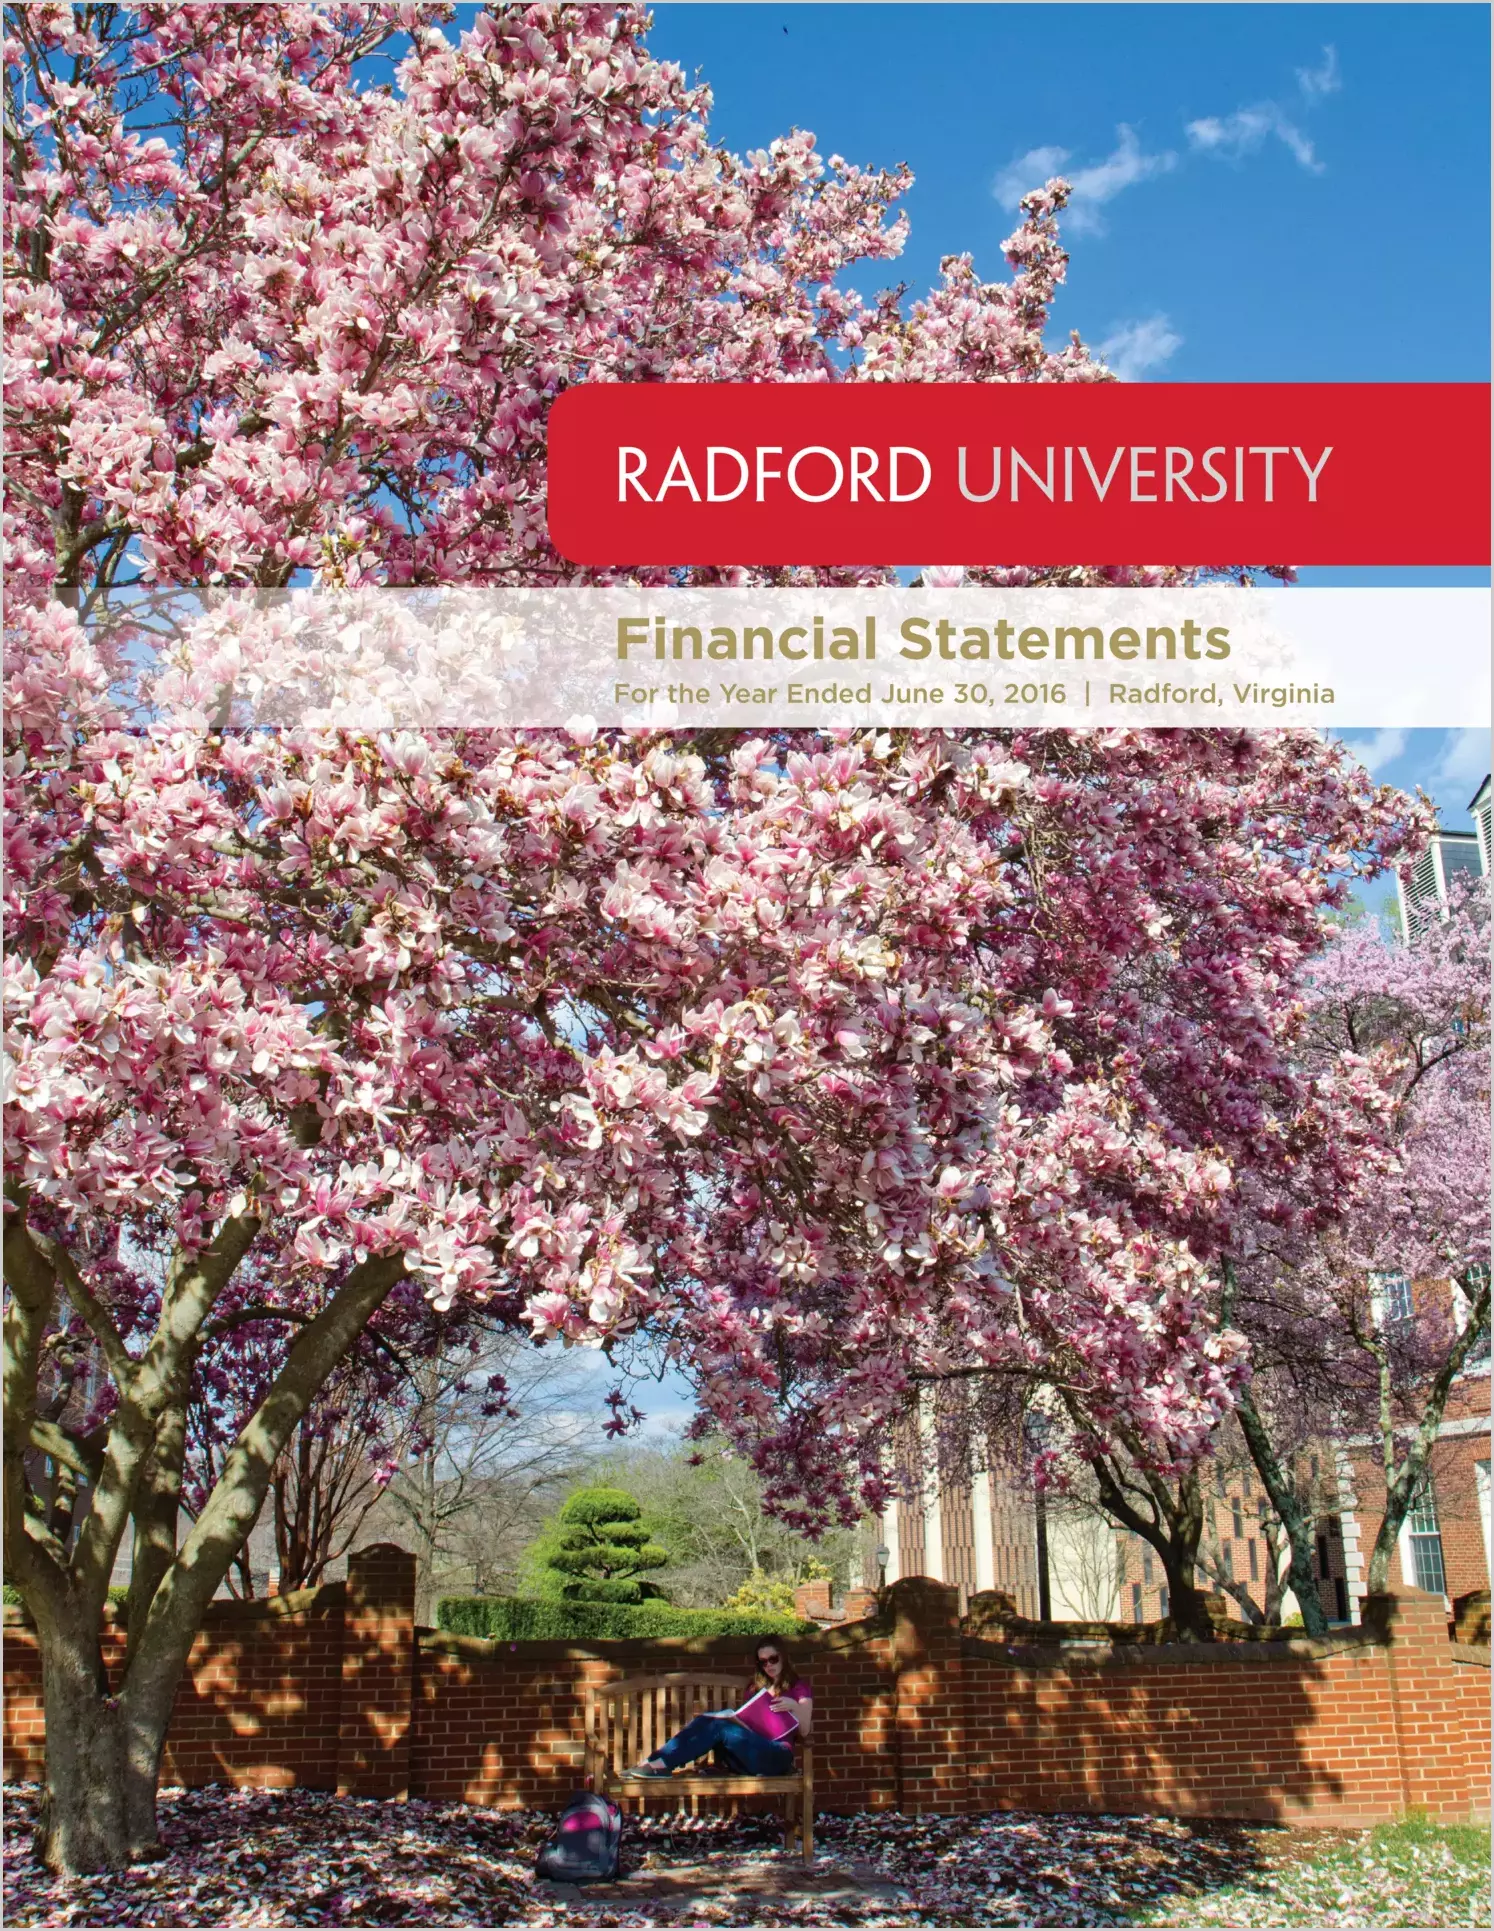 Radford University Financial Statements for the year ended June 30, 2016